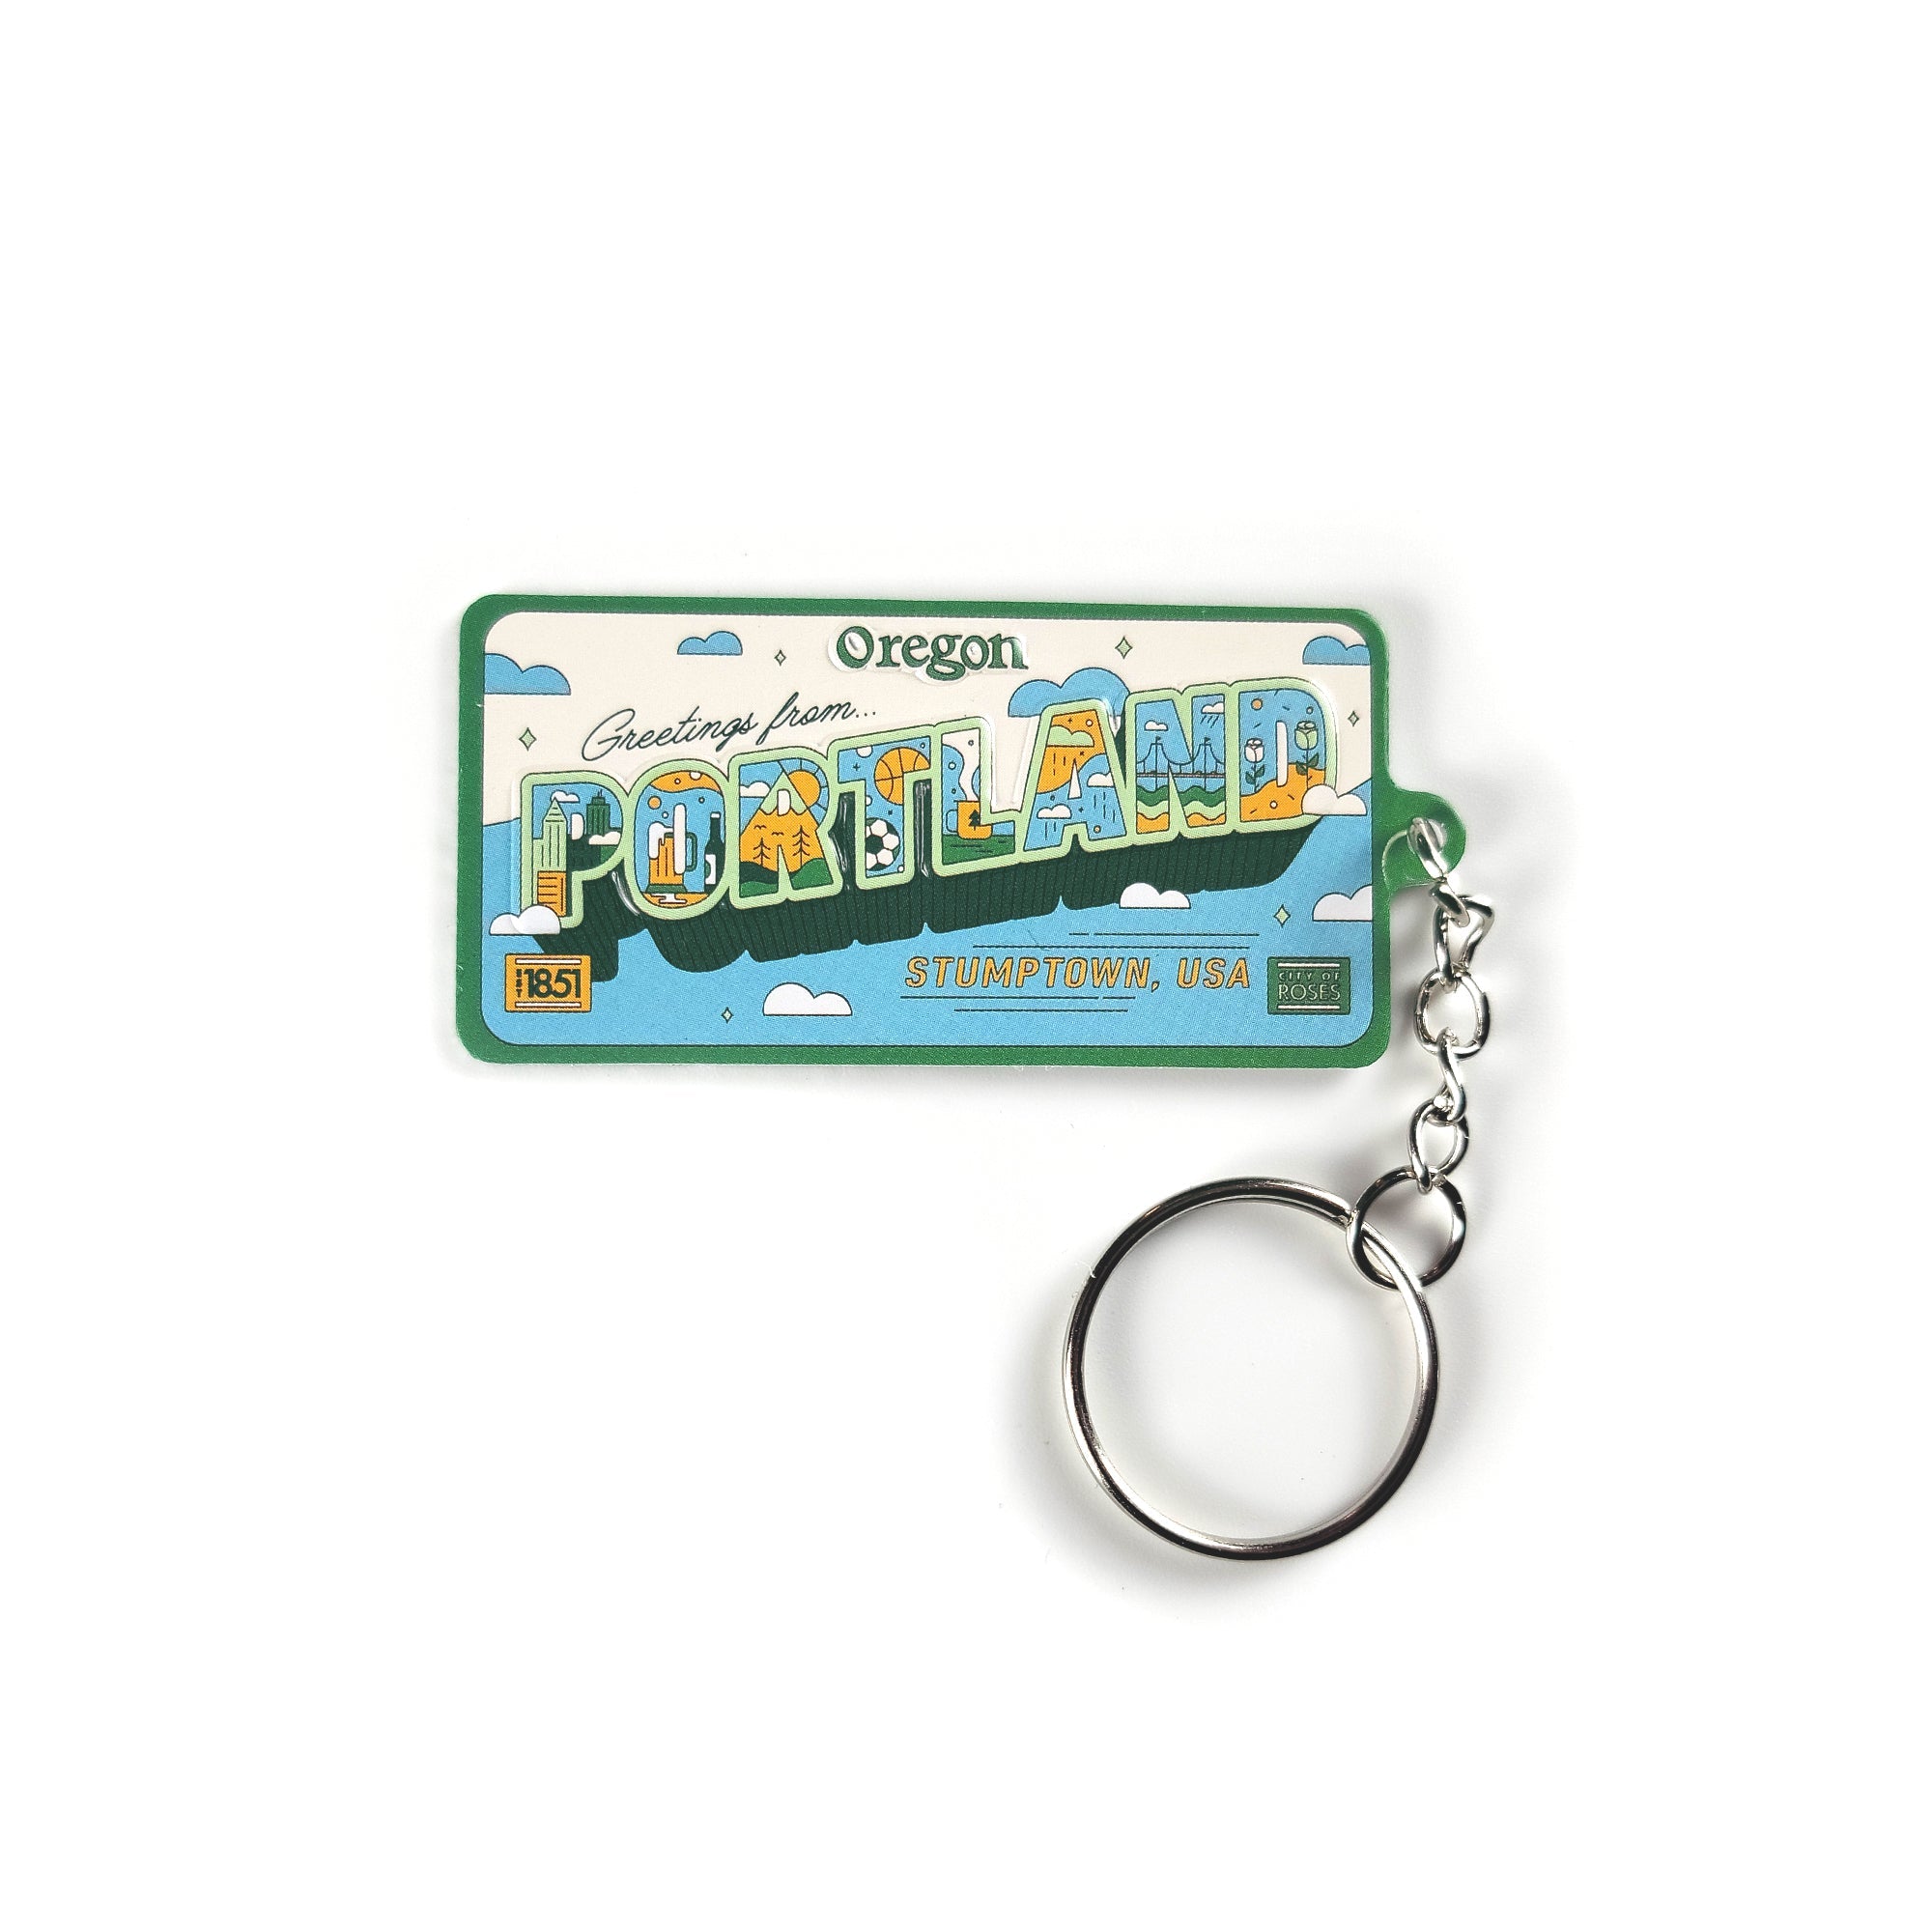 Pete's Point Keychain in Rope – Sailormadeusa